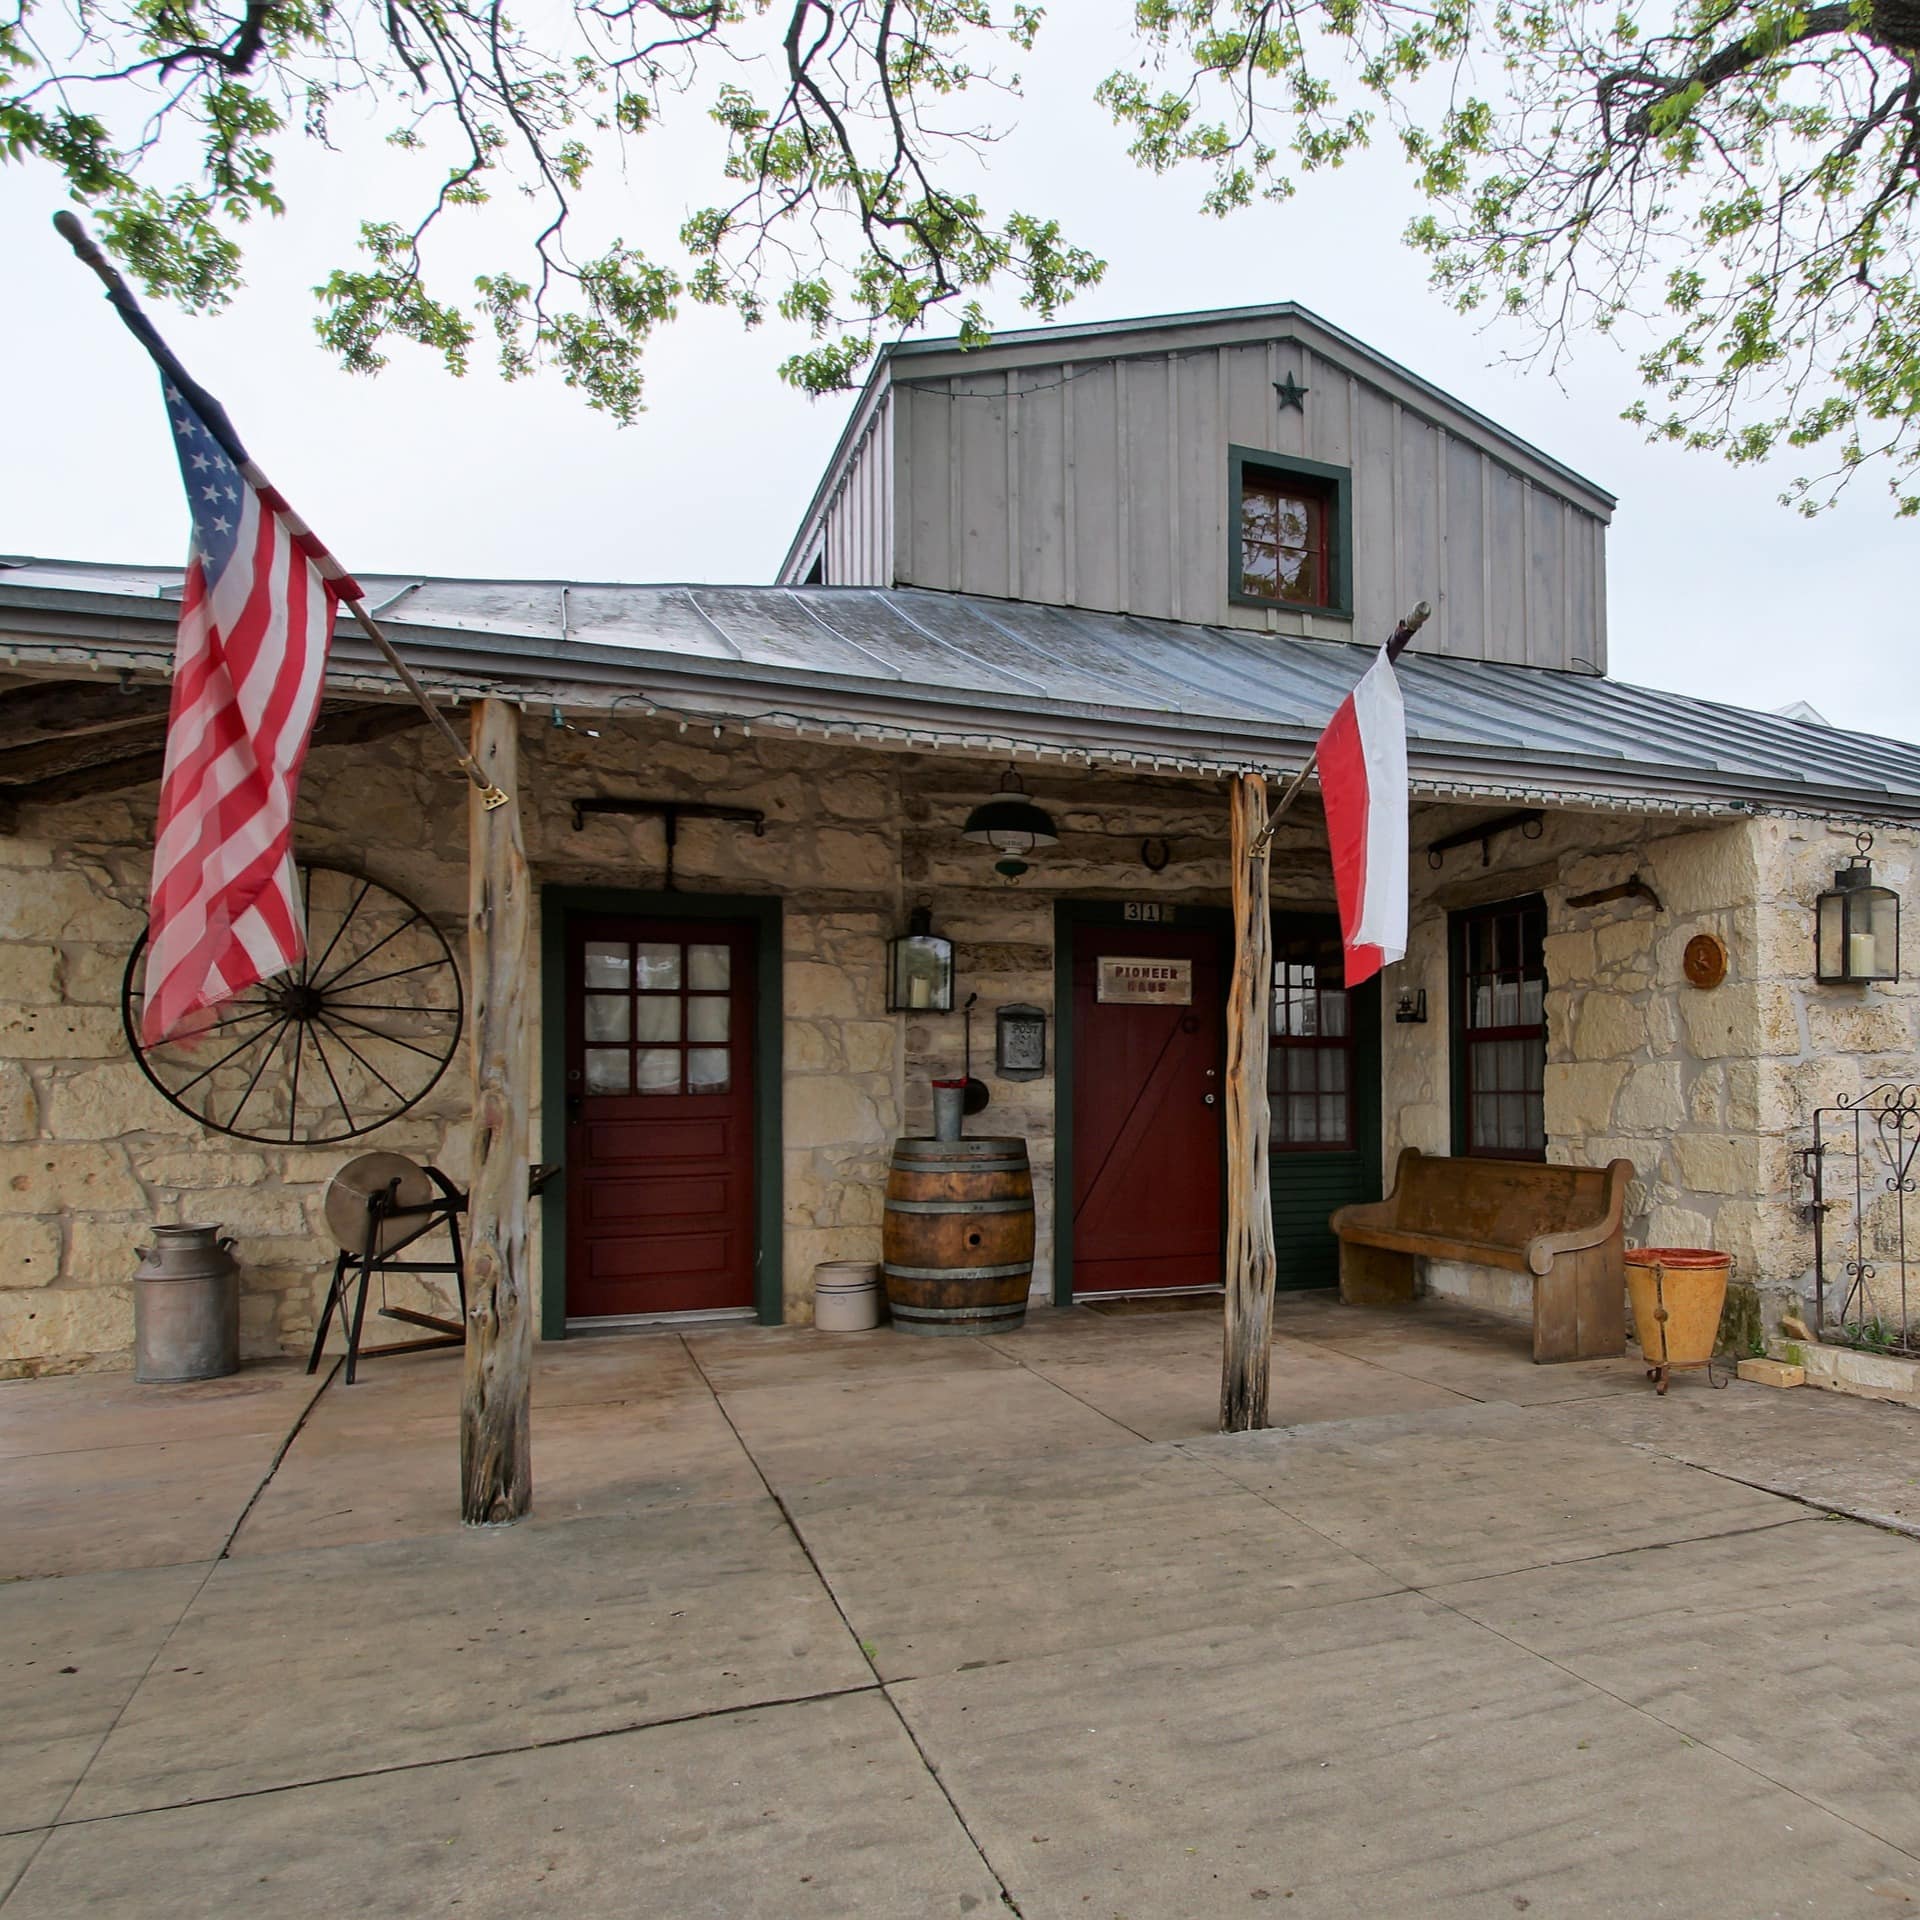 A guest house with a Texan ranch vibe has wagon wheels and barrels decorating its exterior